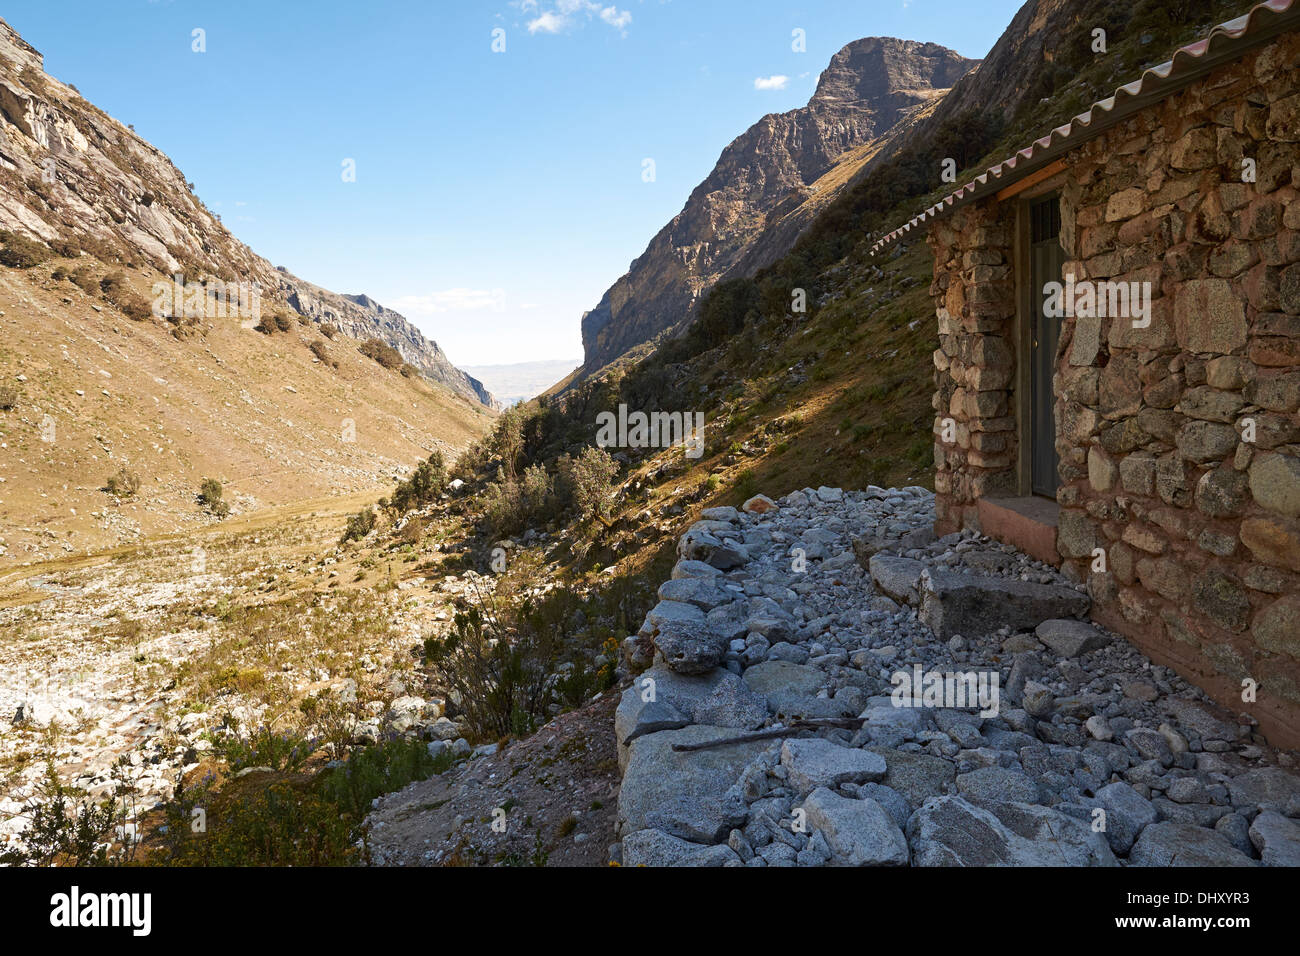 Stone hut in the Llaca valley in the Peruvian Andes, South America. Stock Photo